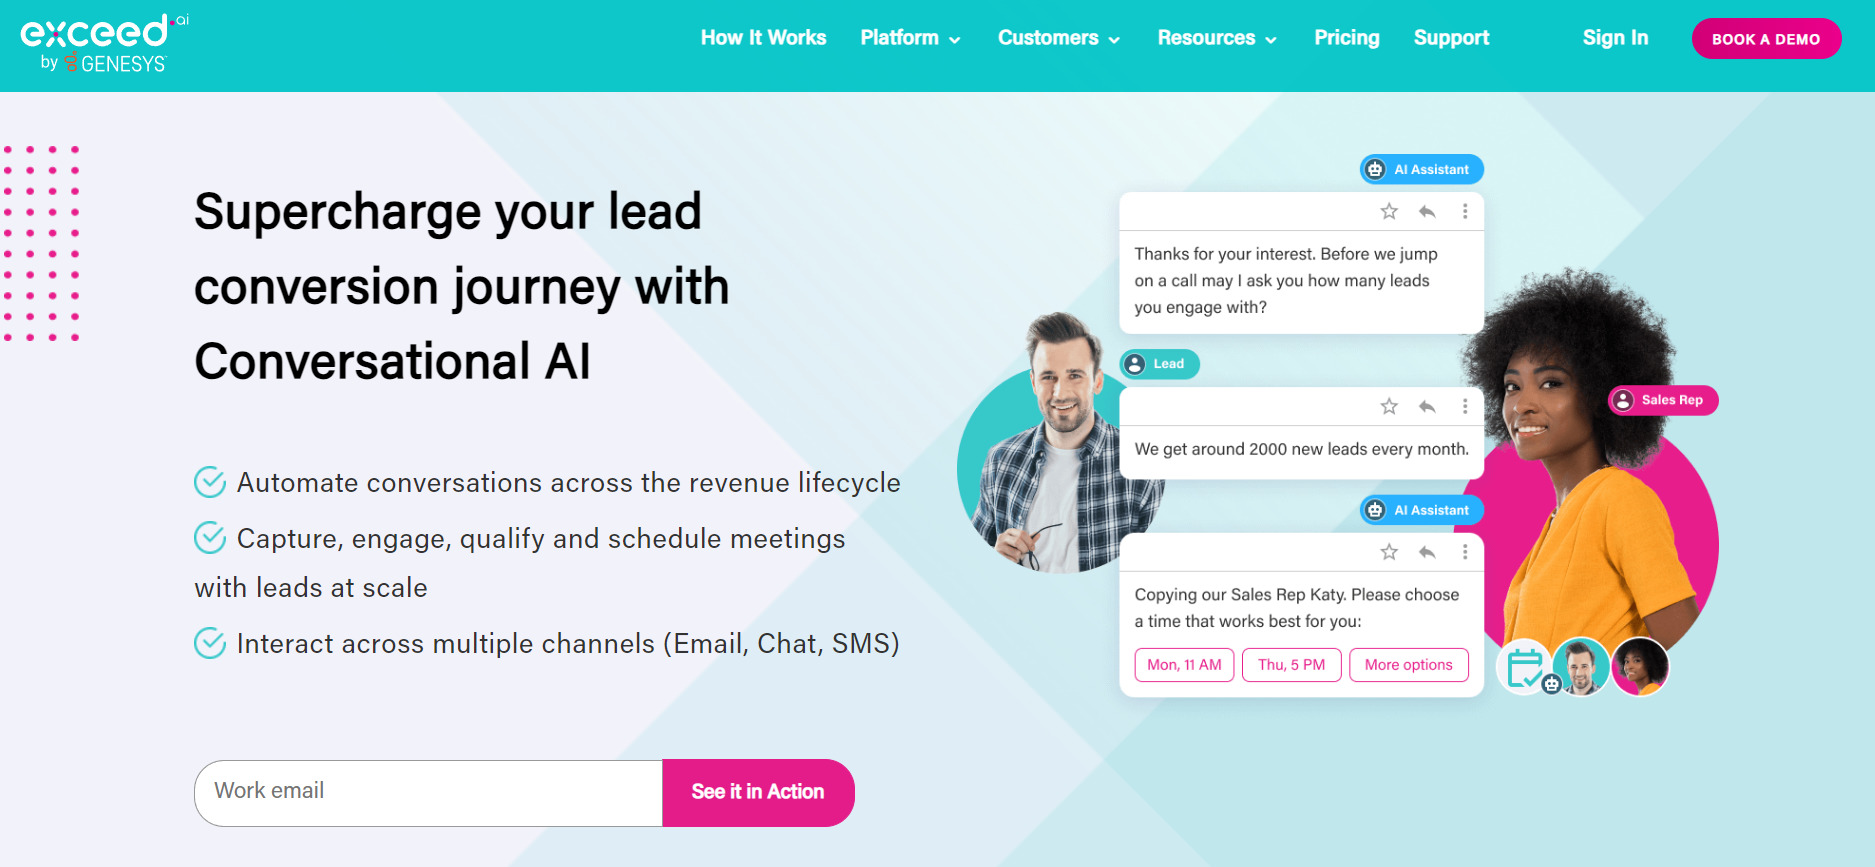 exceed.ai as an AI sales tool